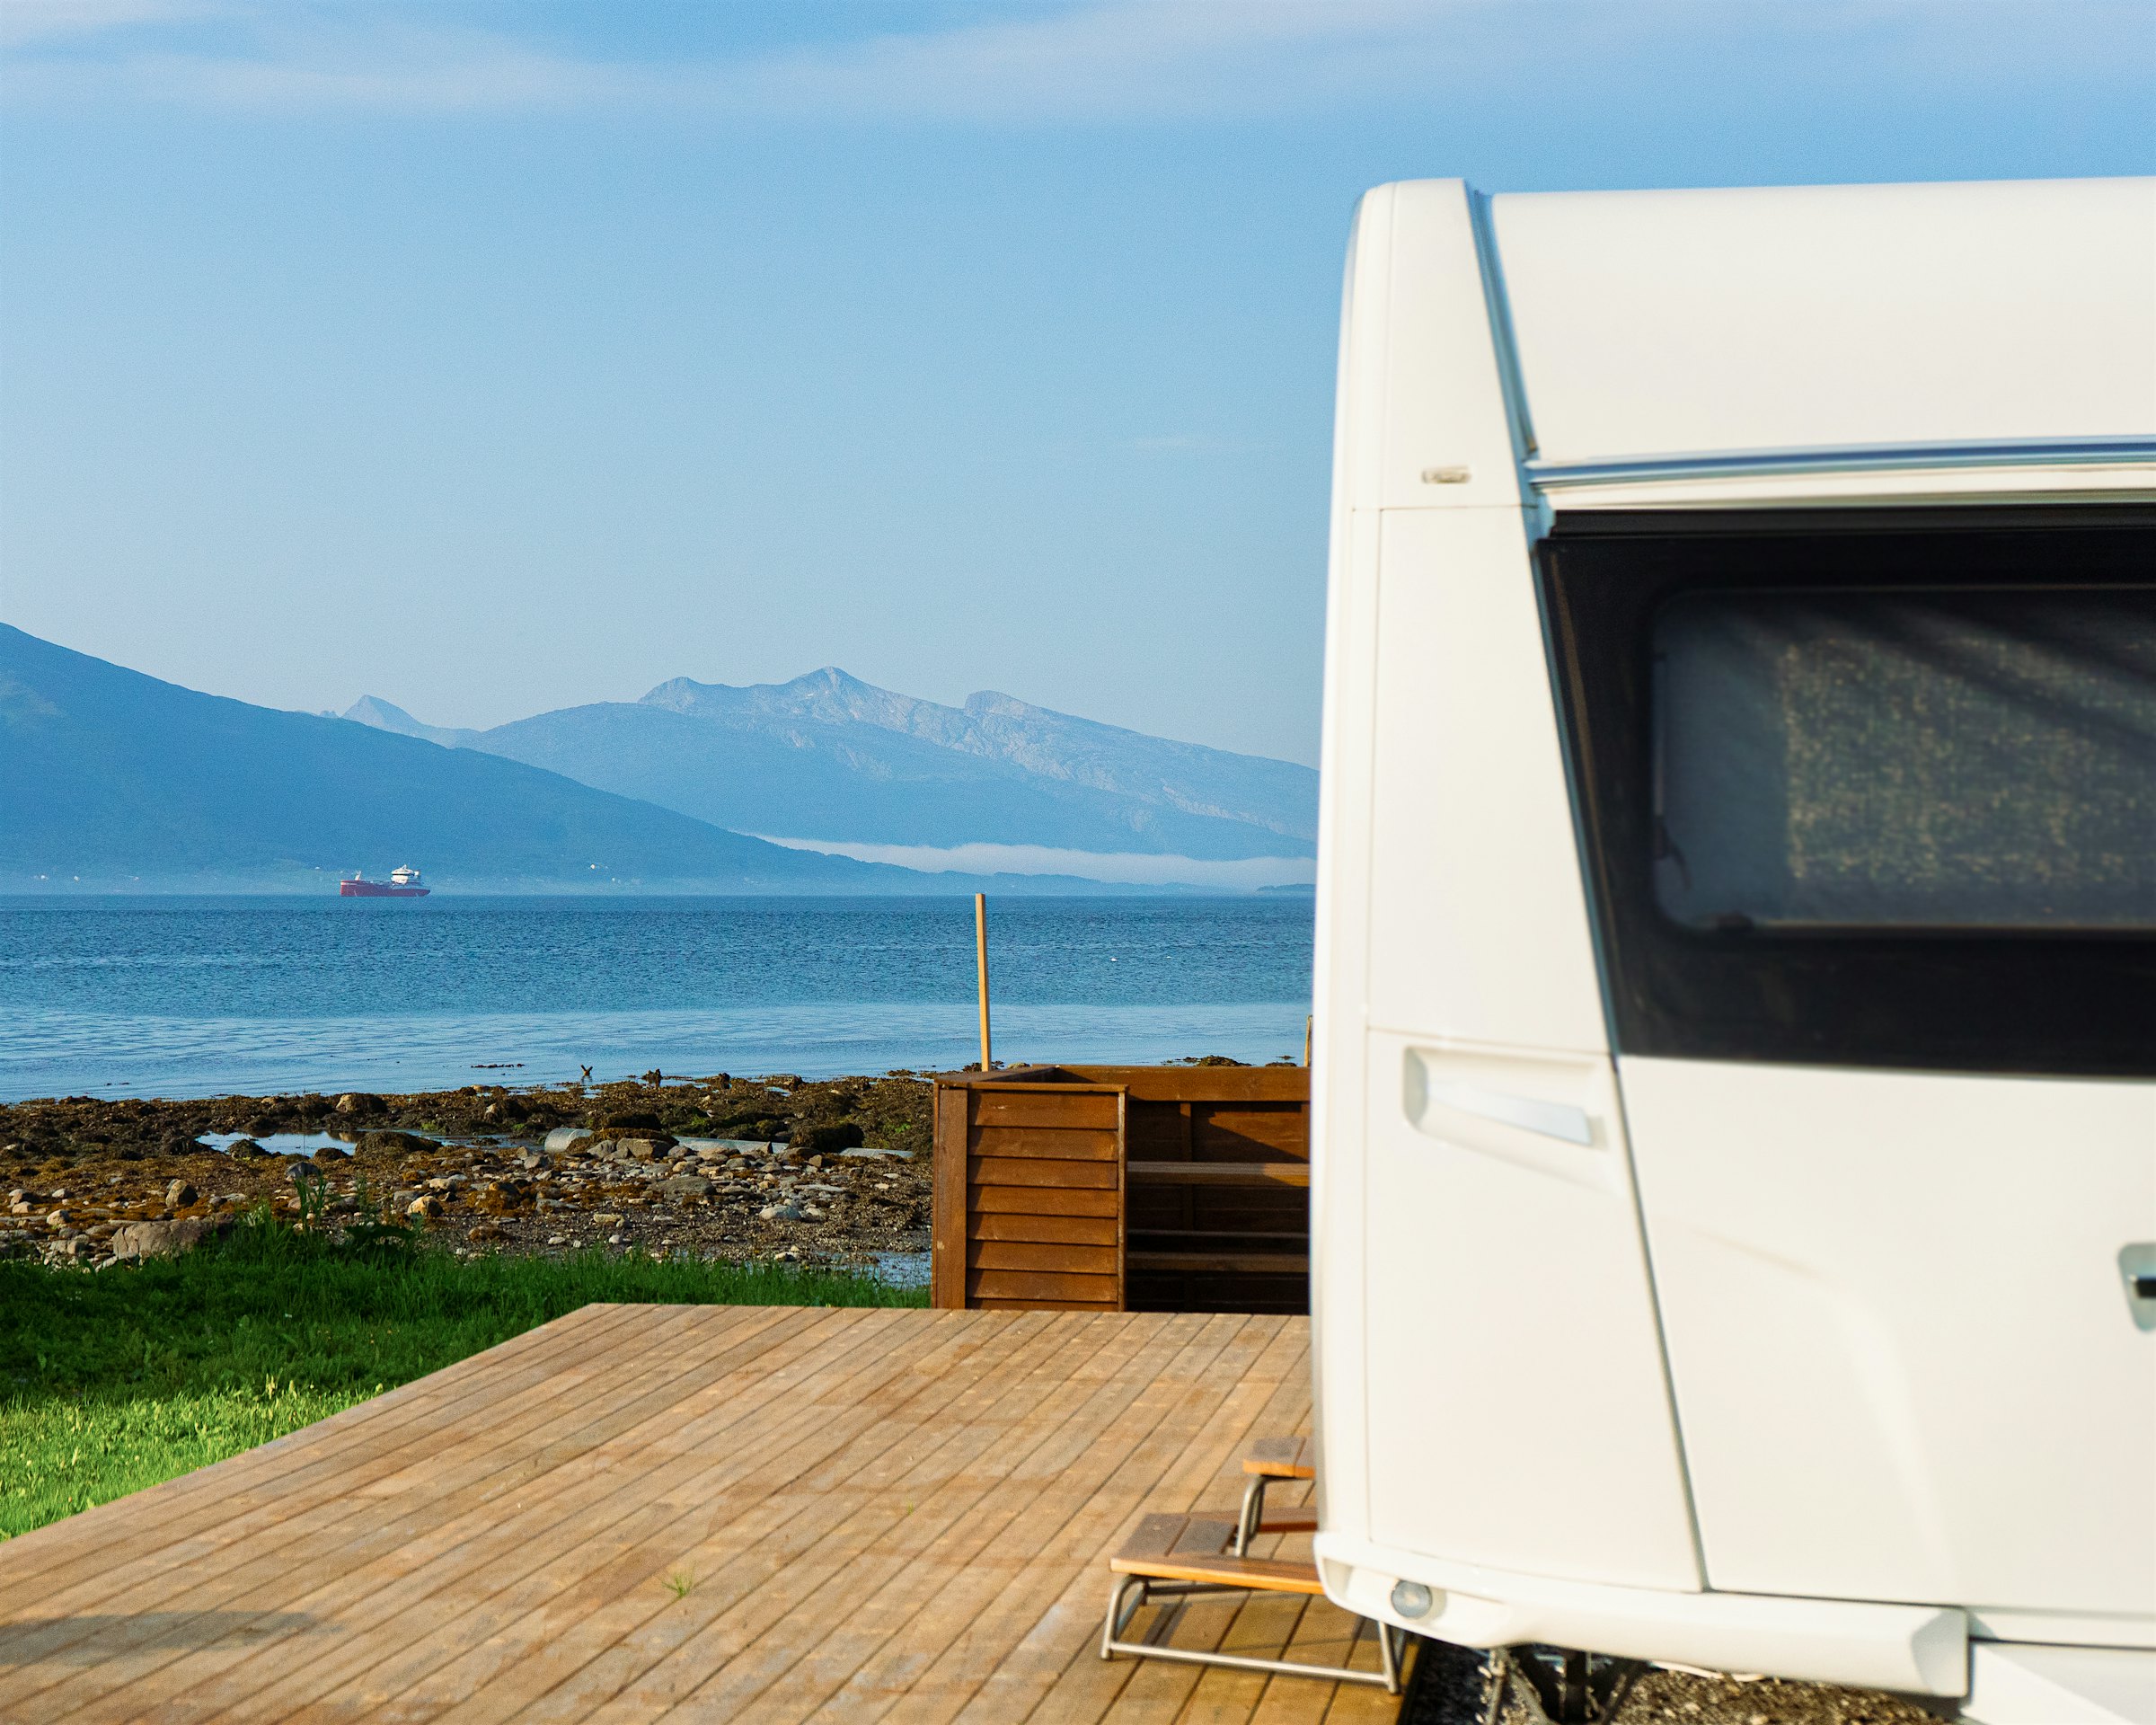 Caravan front with wooden cladding outside. View to sea and mountains. Photo